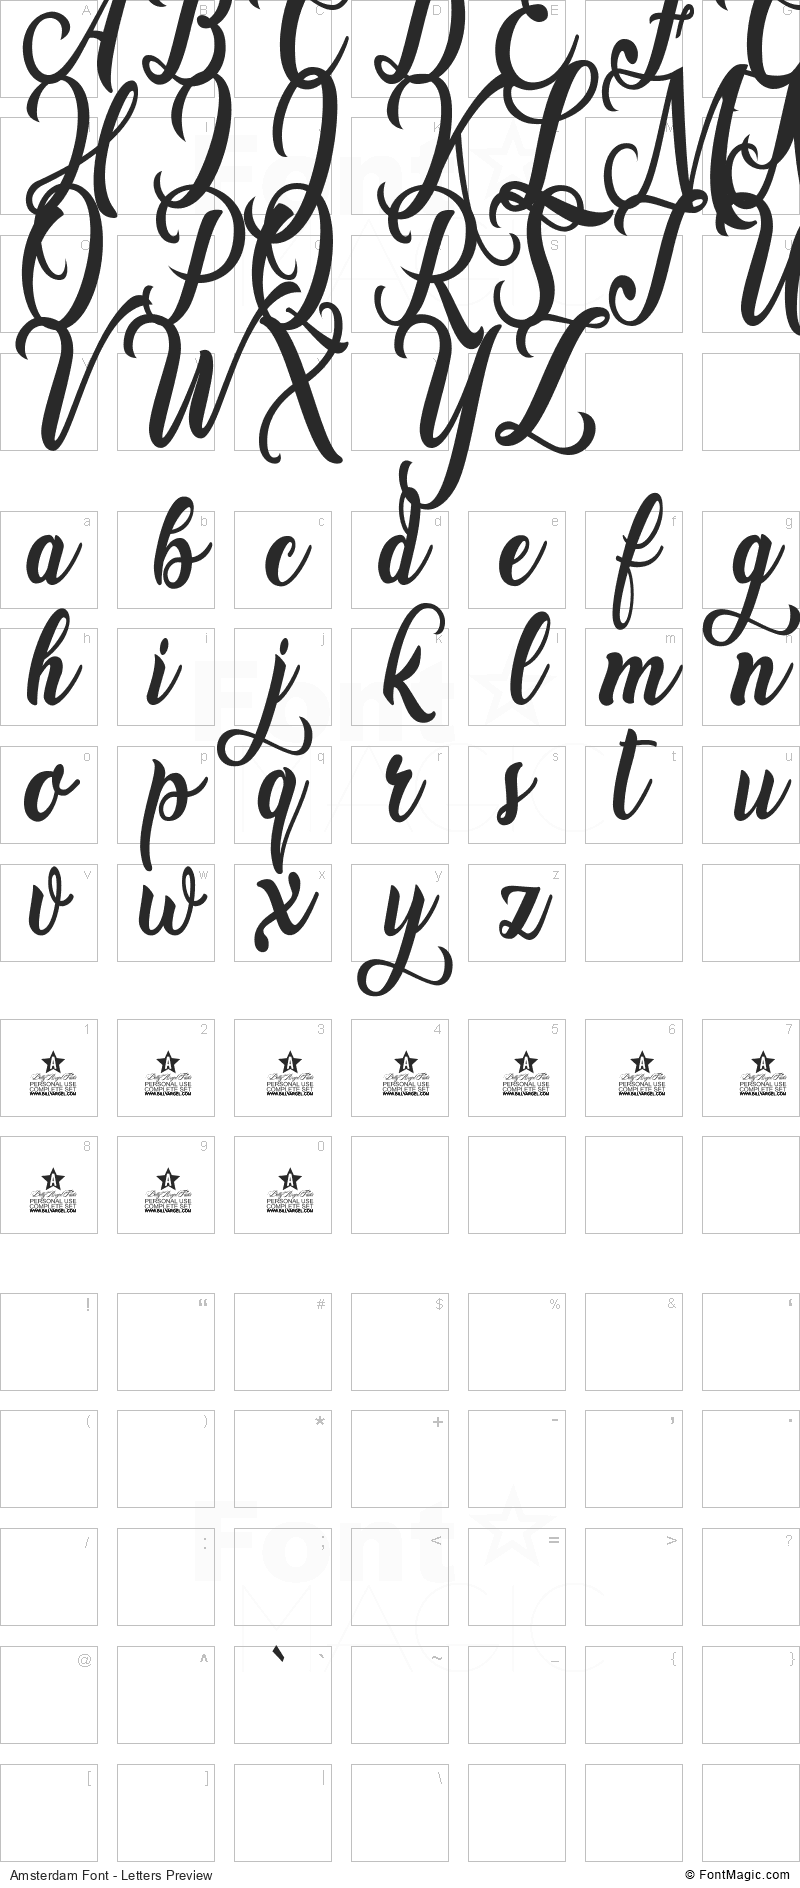 Amsterdam Font - All Latters Preview Chart